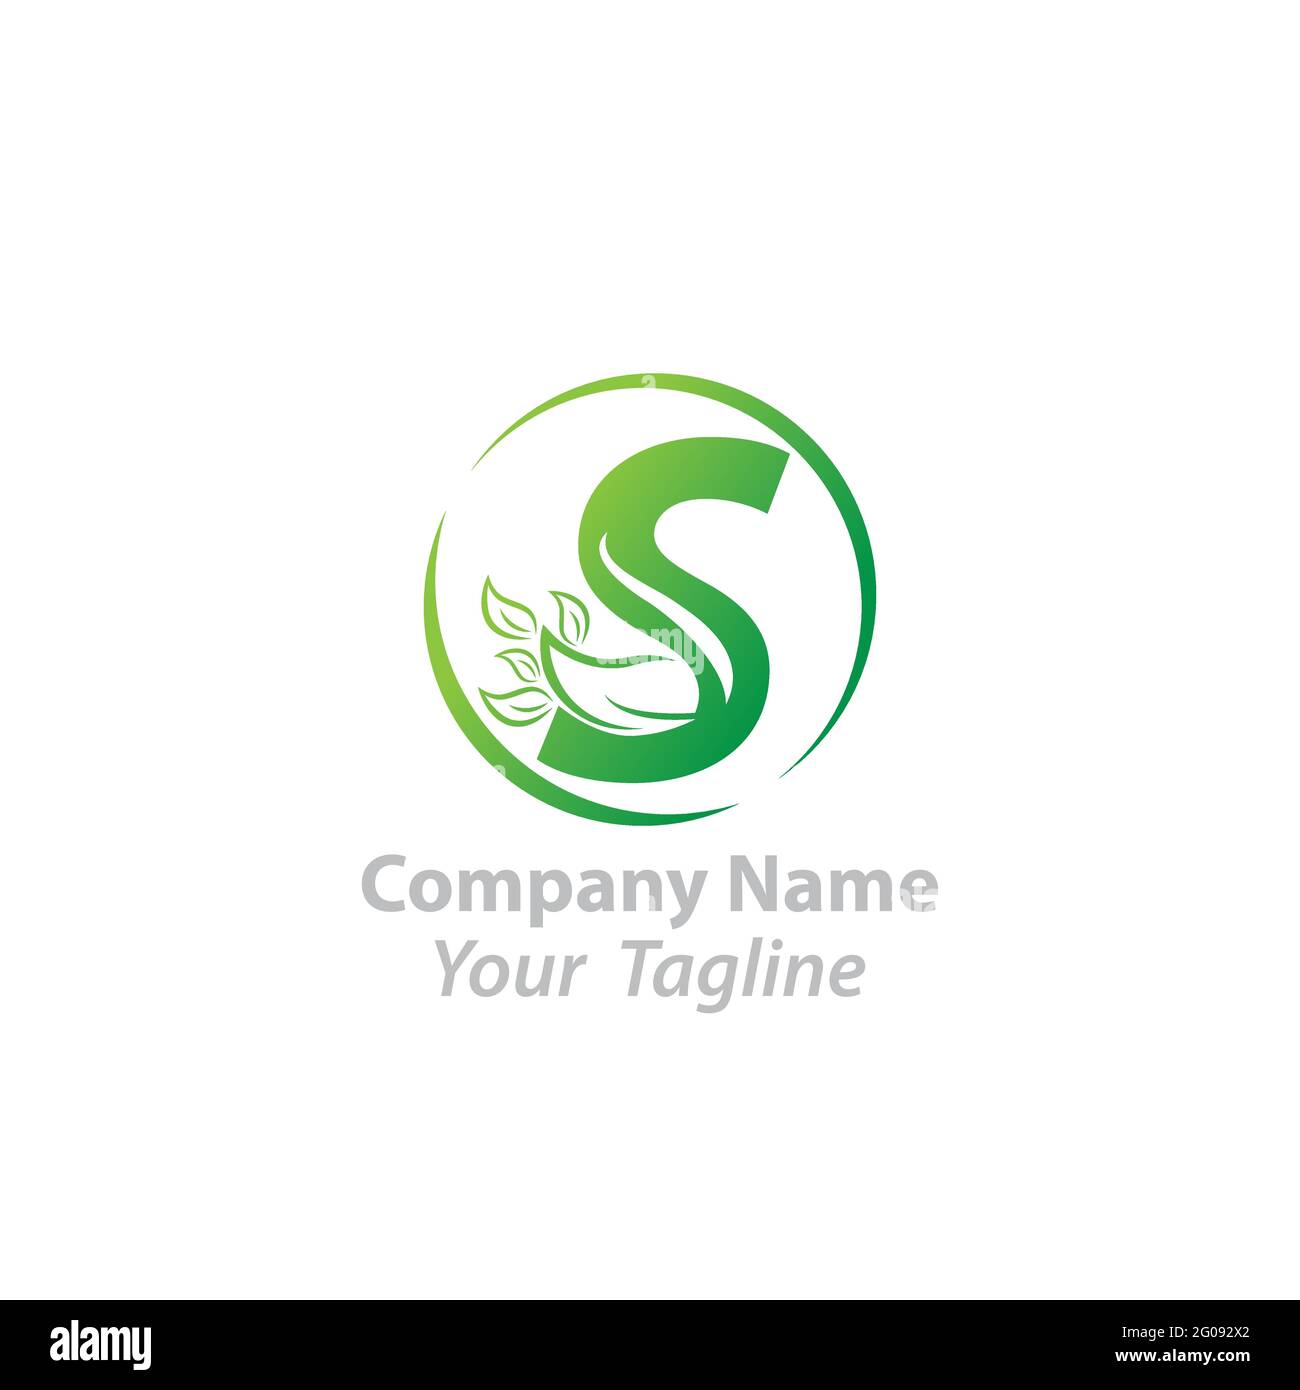 Initial Letter S With Leaf Luxury Logo. Green leaf logo Template vector Design.EPS 10 Stock Vector